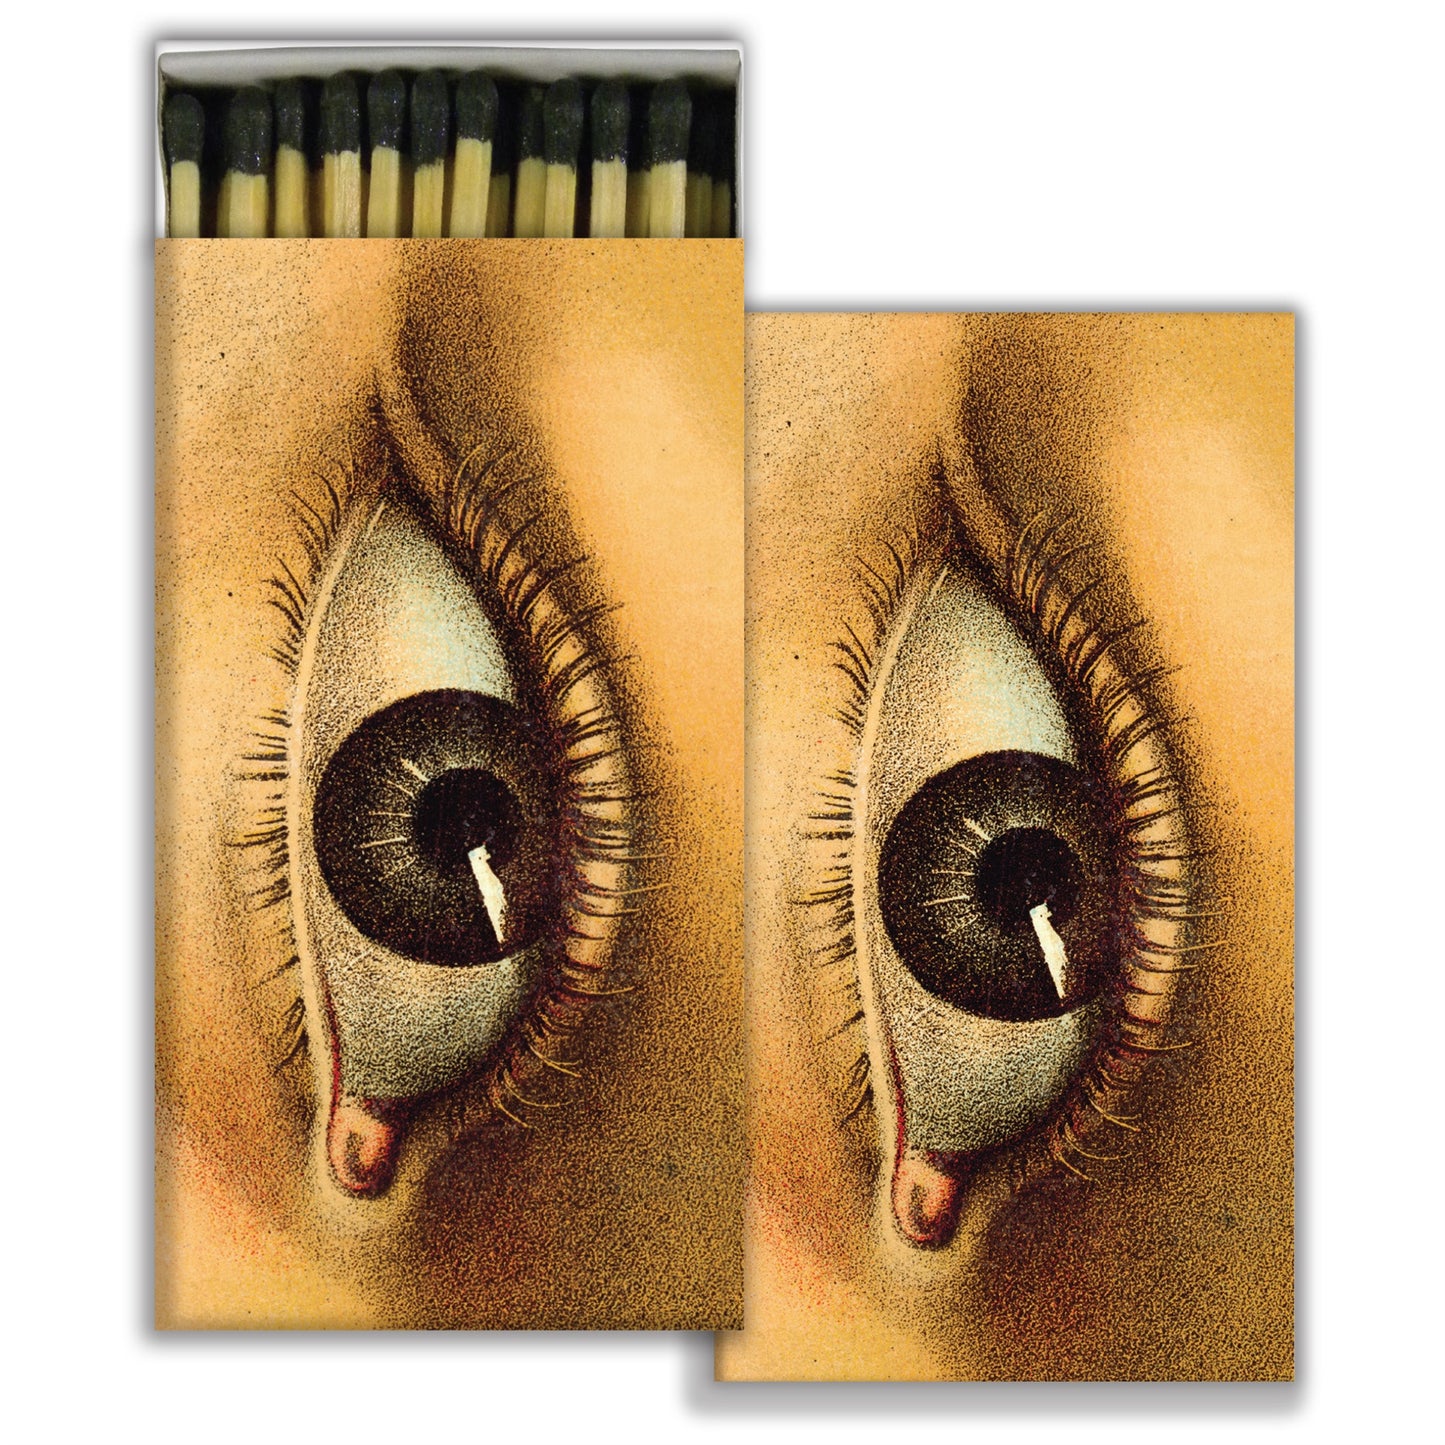 Box of matches with close-up of female eye illustration